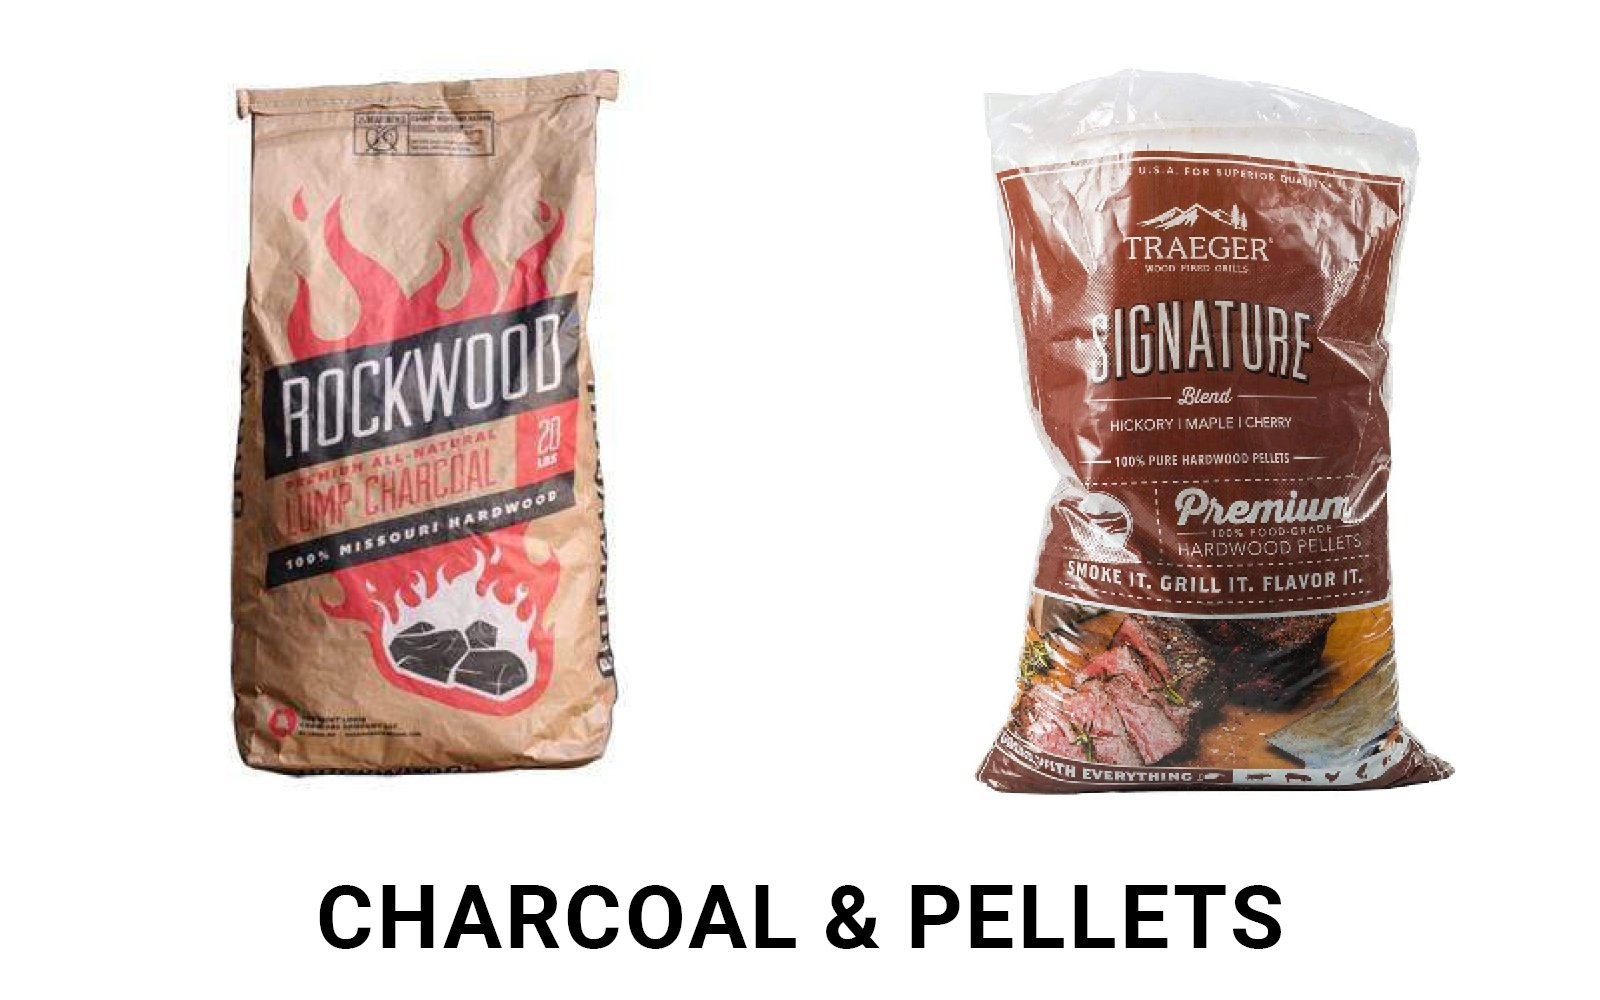 Charcoal & Pellets Made in the USA